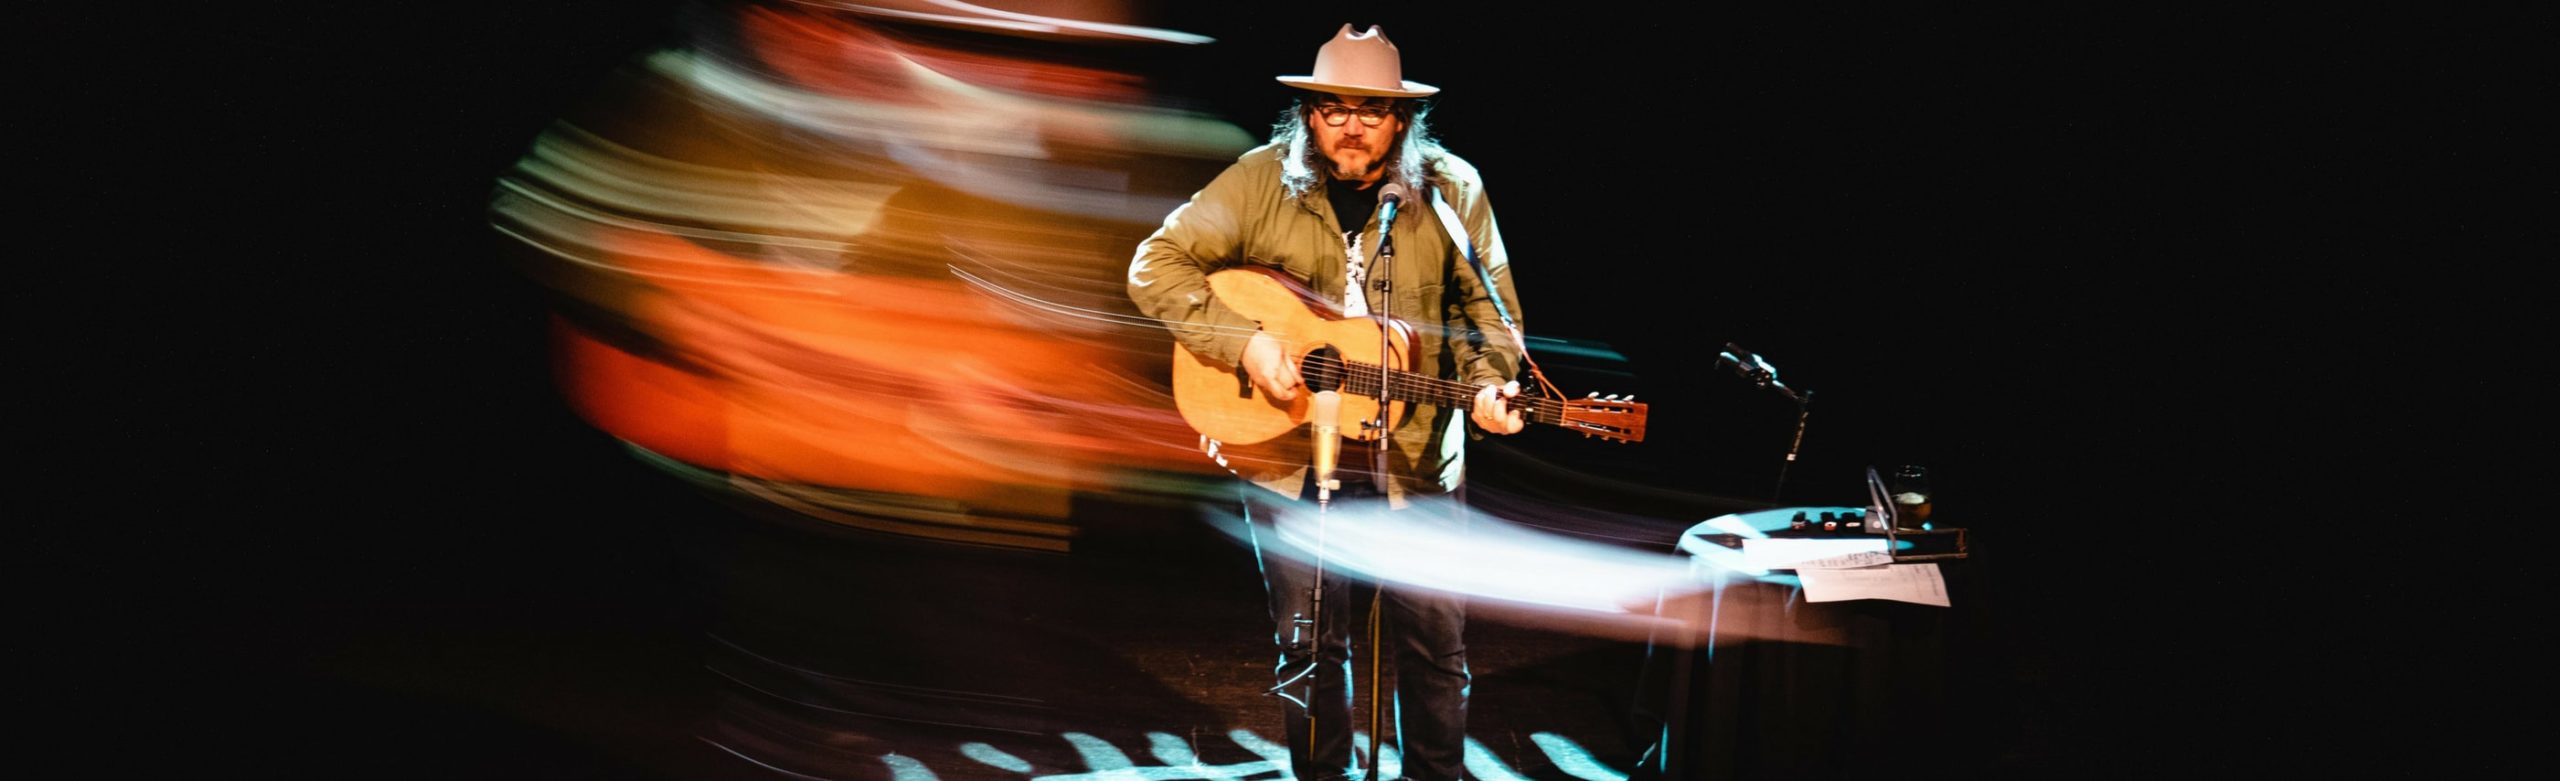 Listen to Jeff Tweedy’s Trail Live Session from The Wilma Image